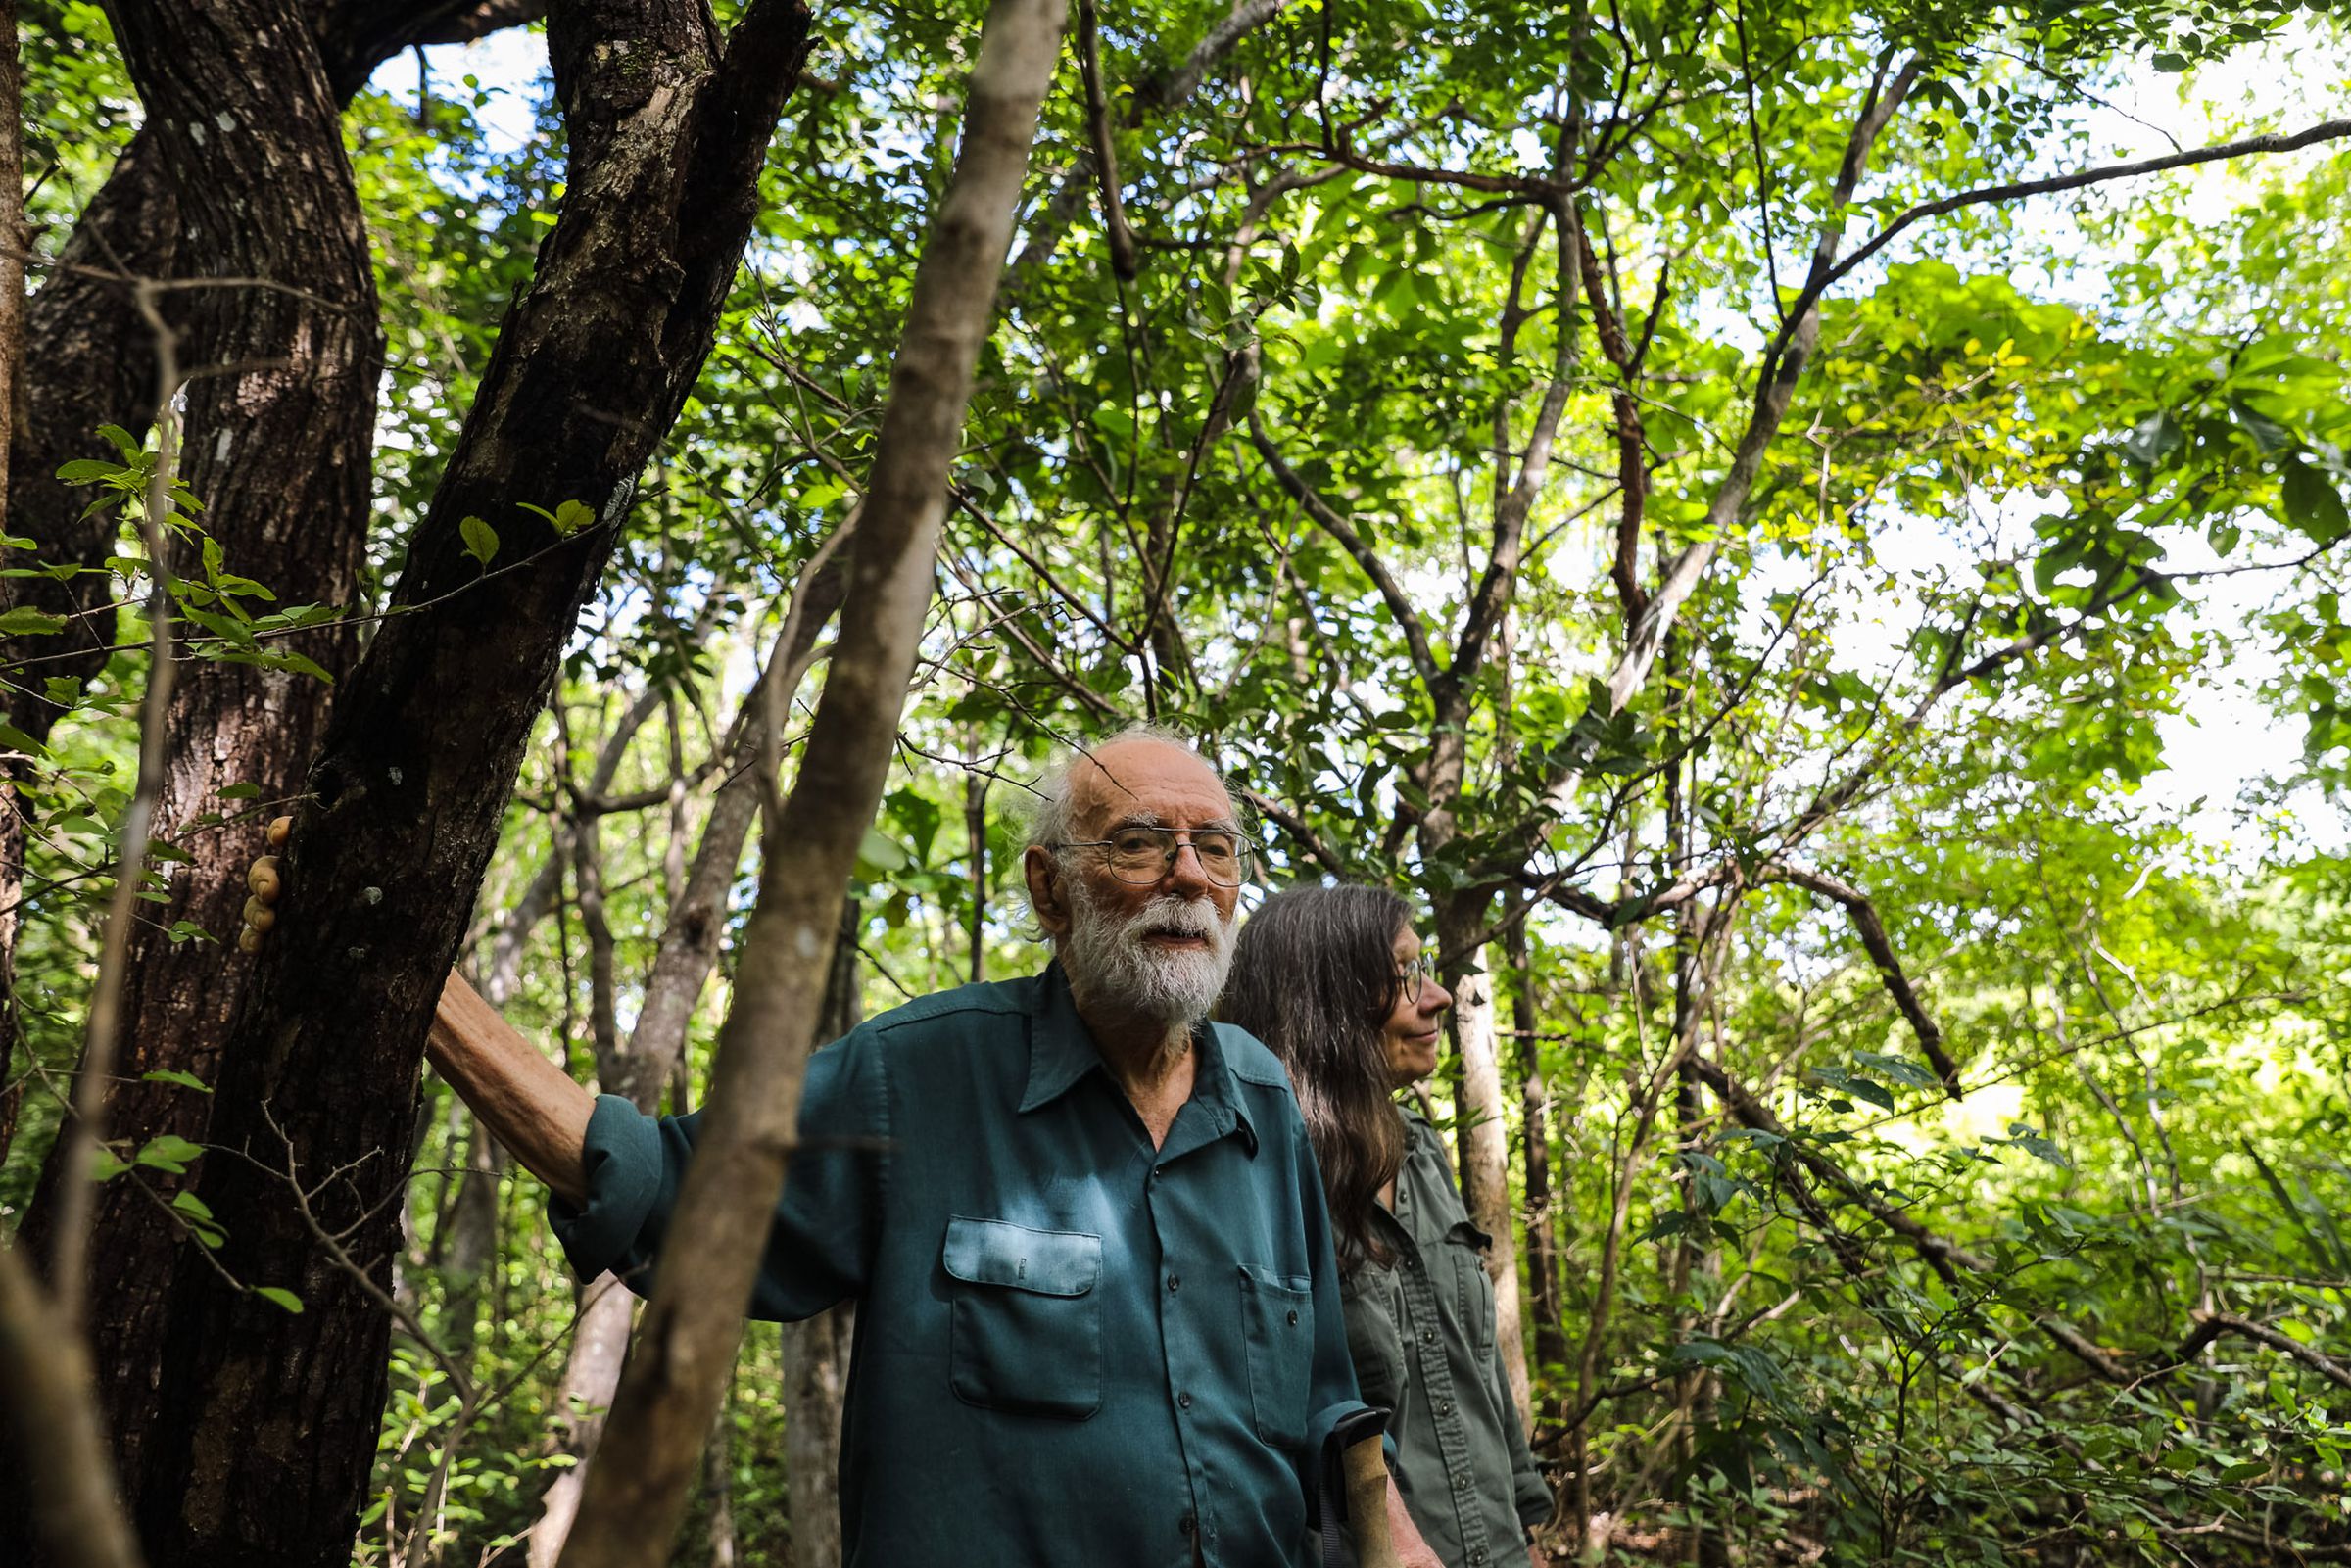 An older man and woman stand side by side in a forest with young trees.